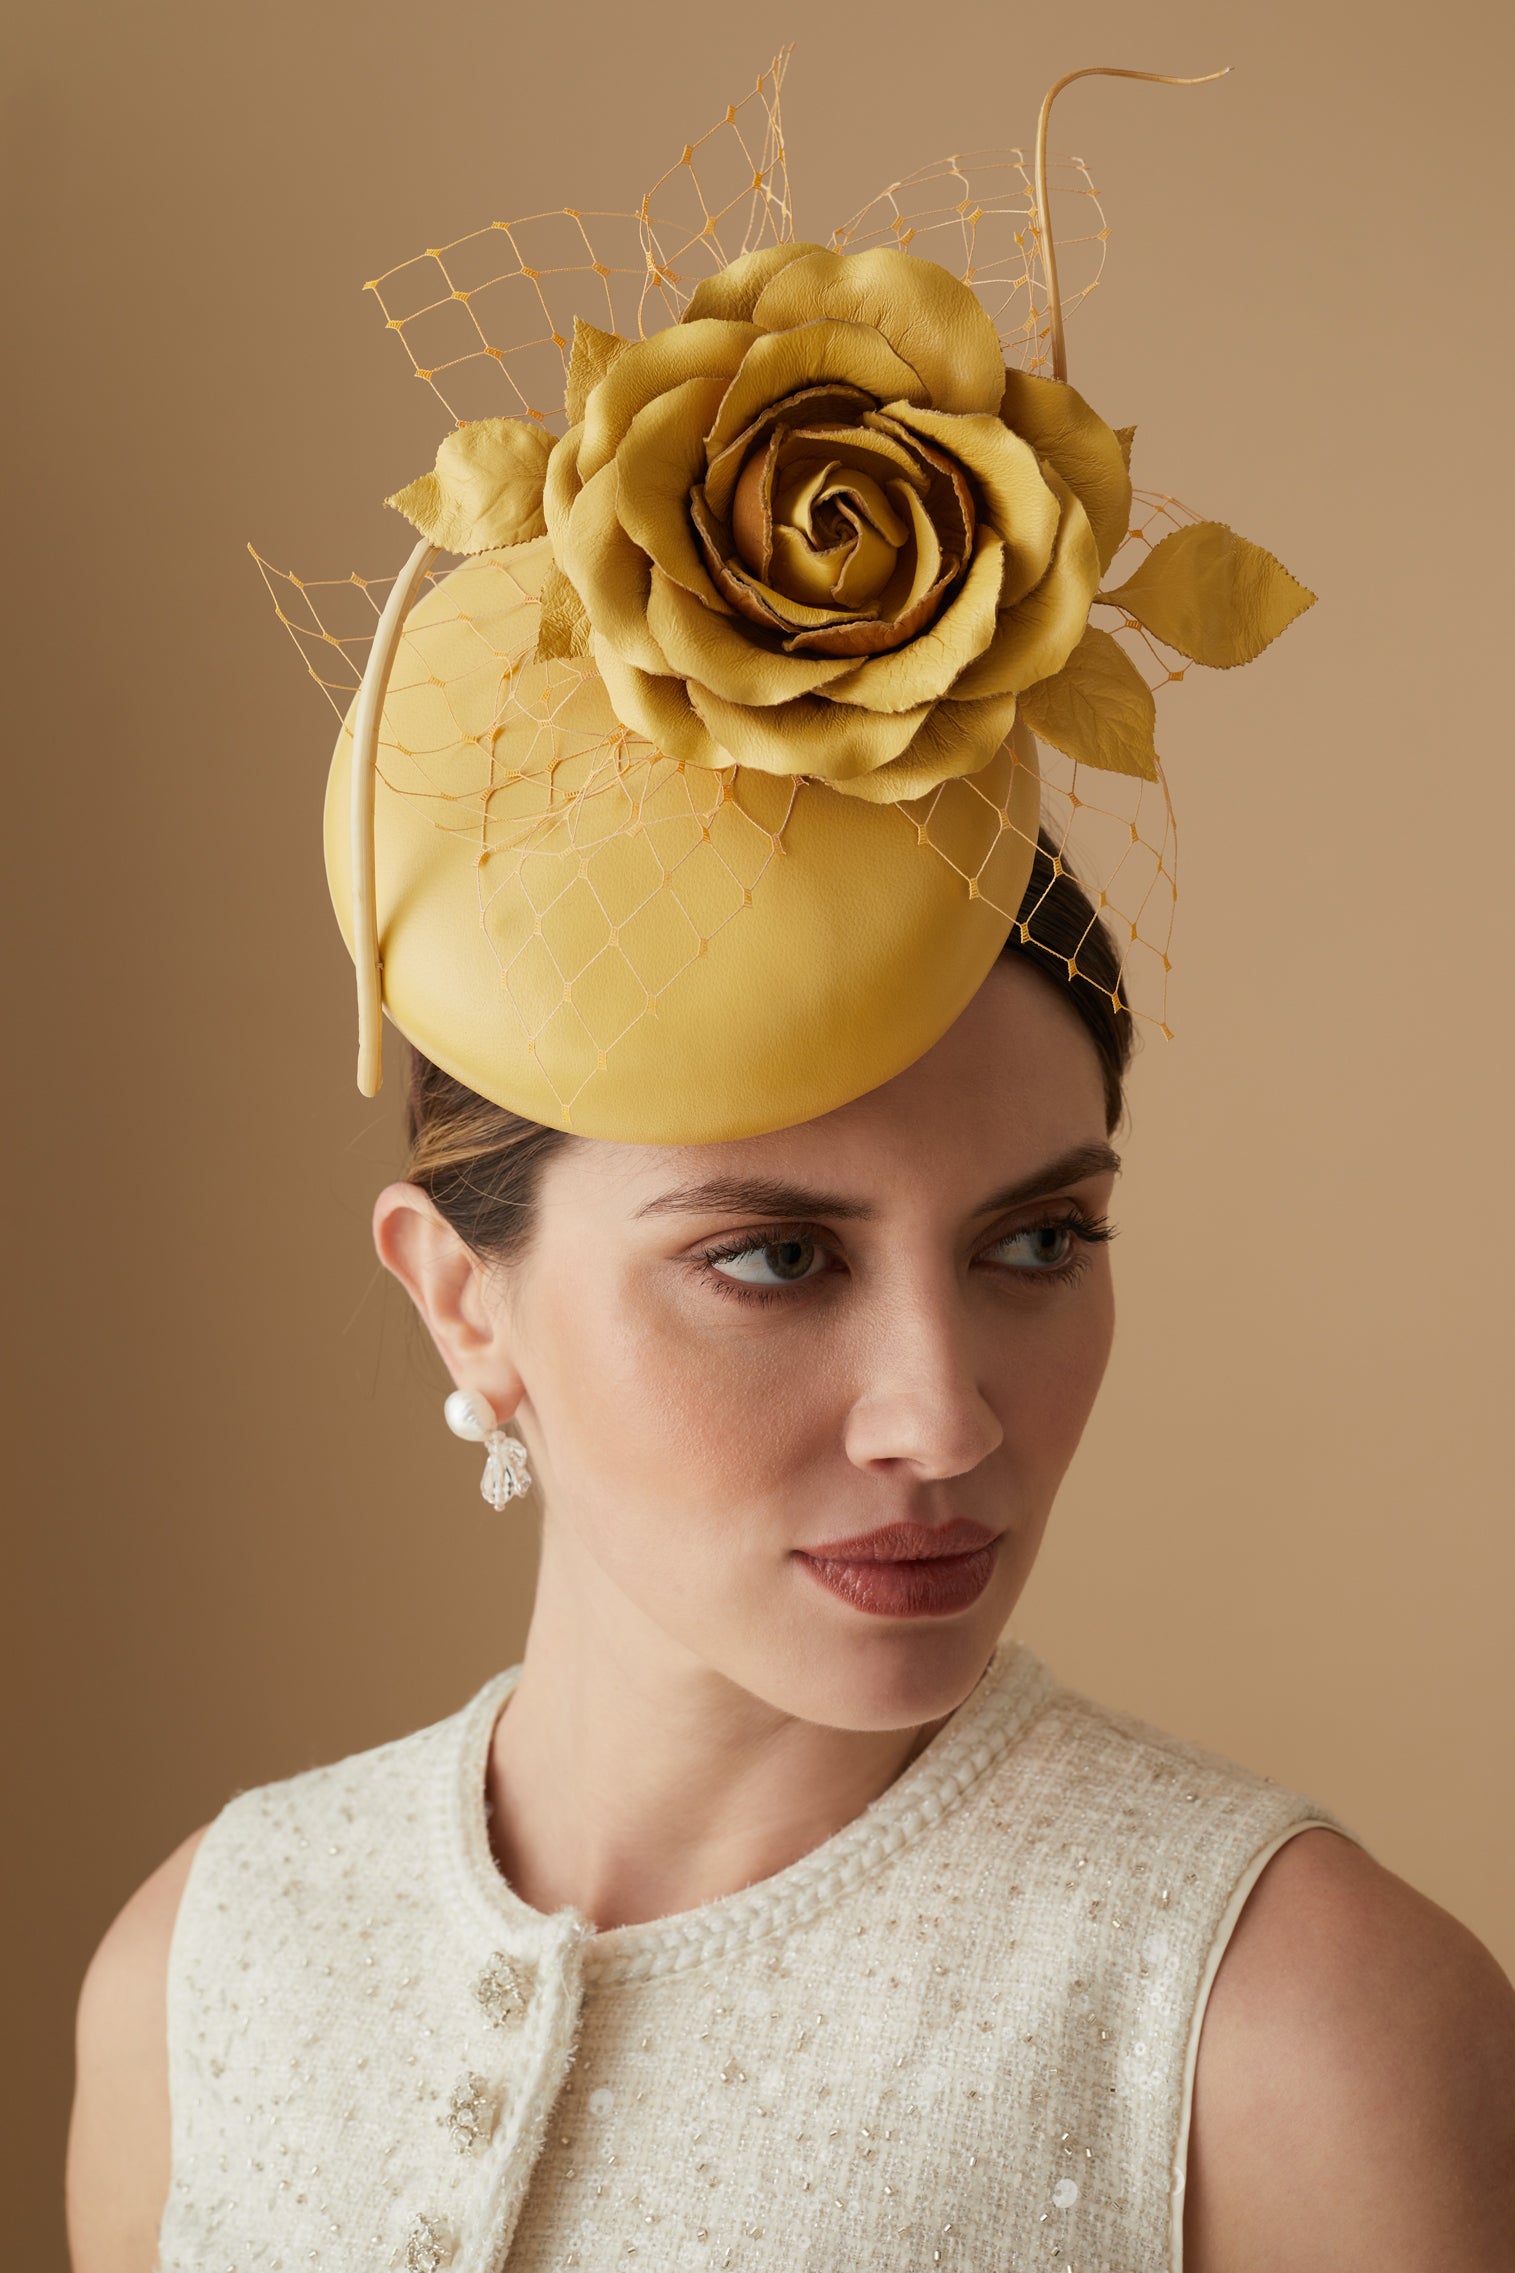 Rose Bud Yellow Leather Percher Hat - New Season Hat Collection - Lock & Co. Hatters London UK